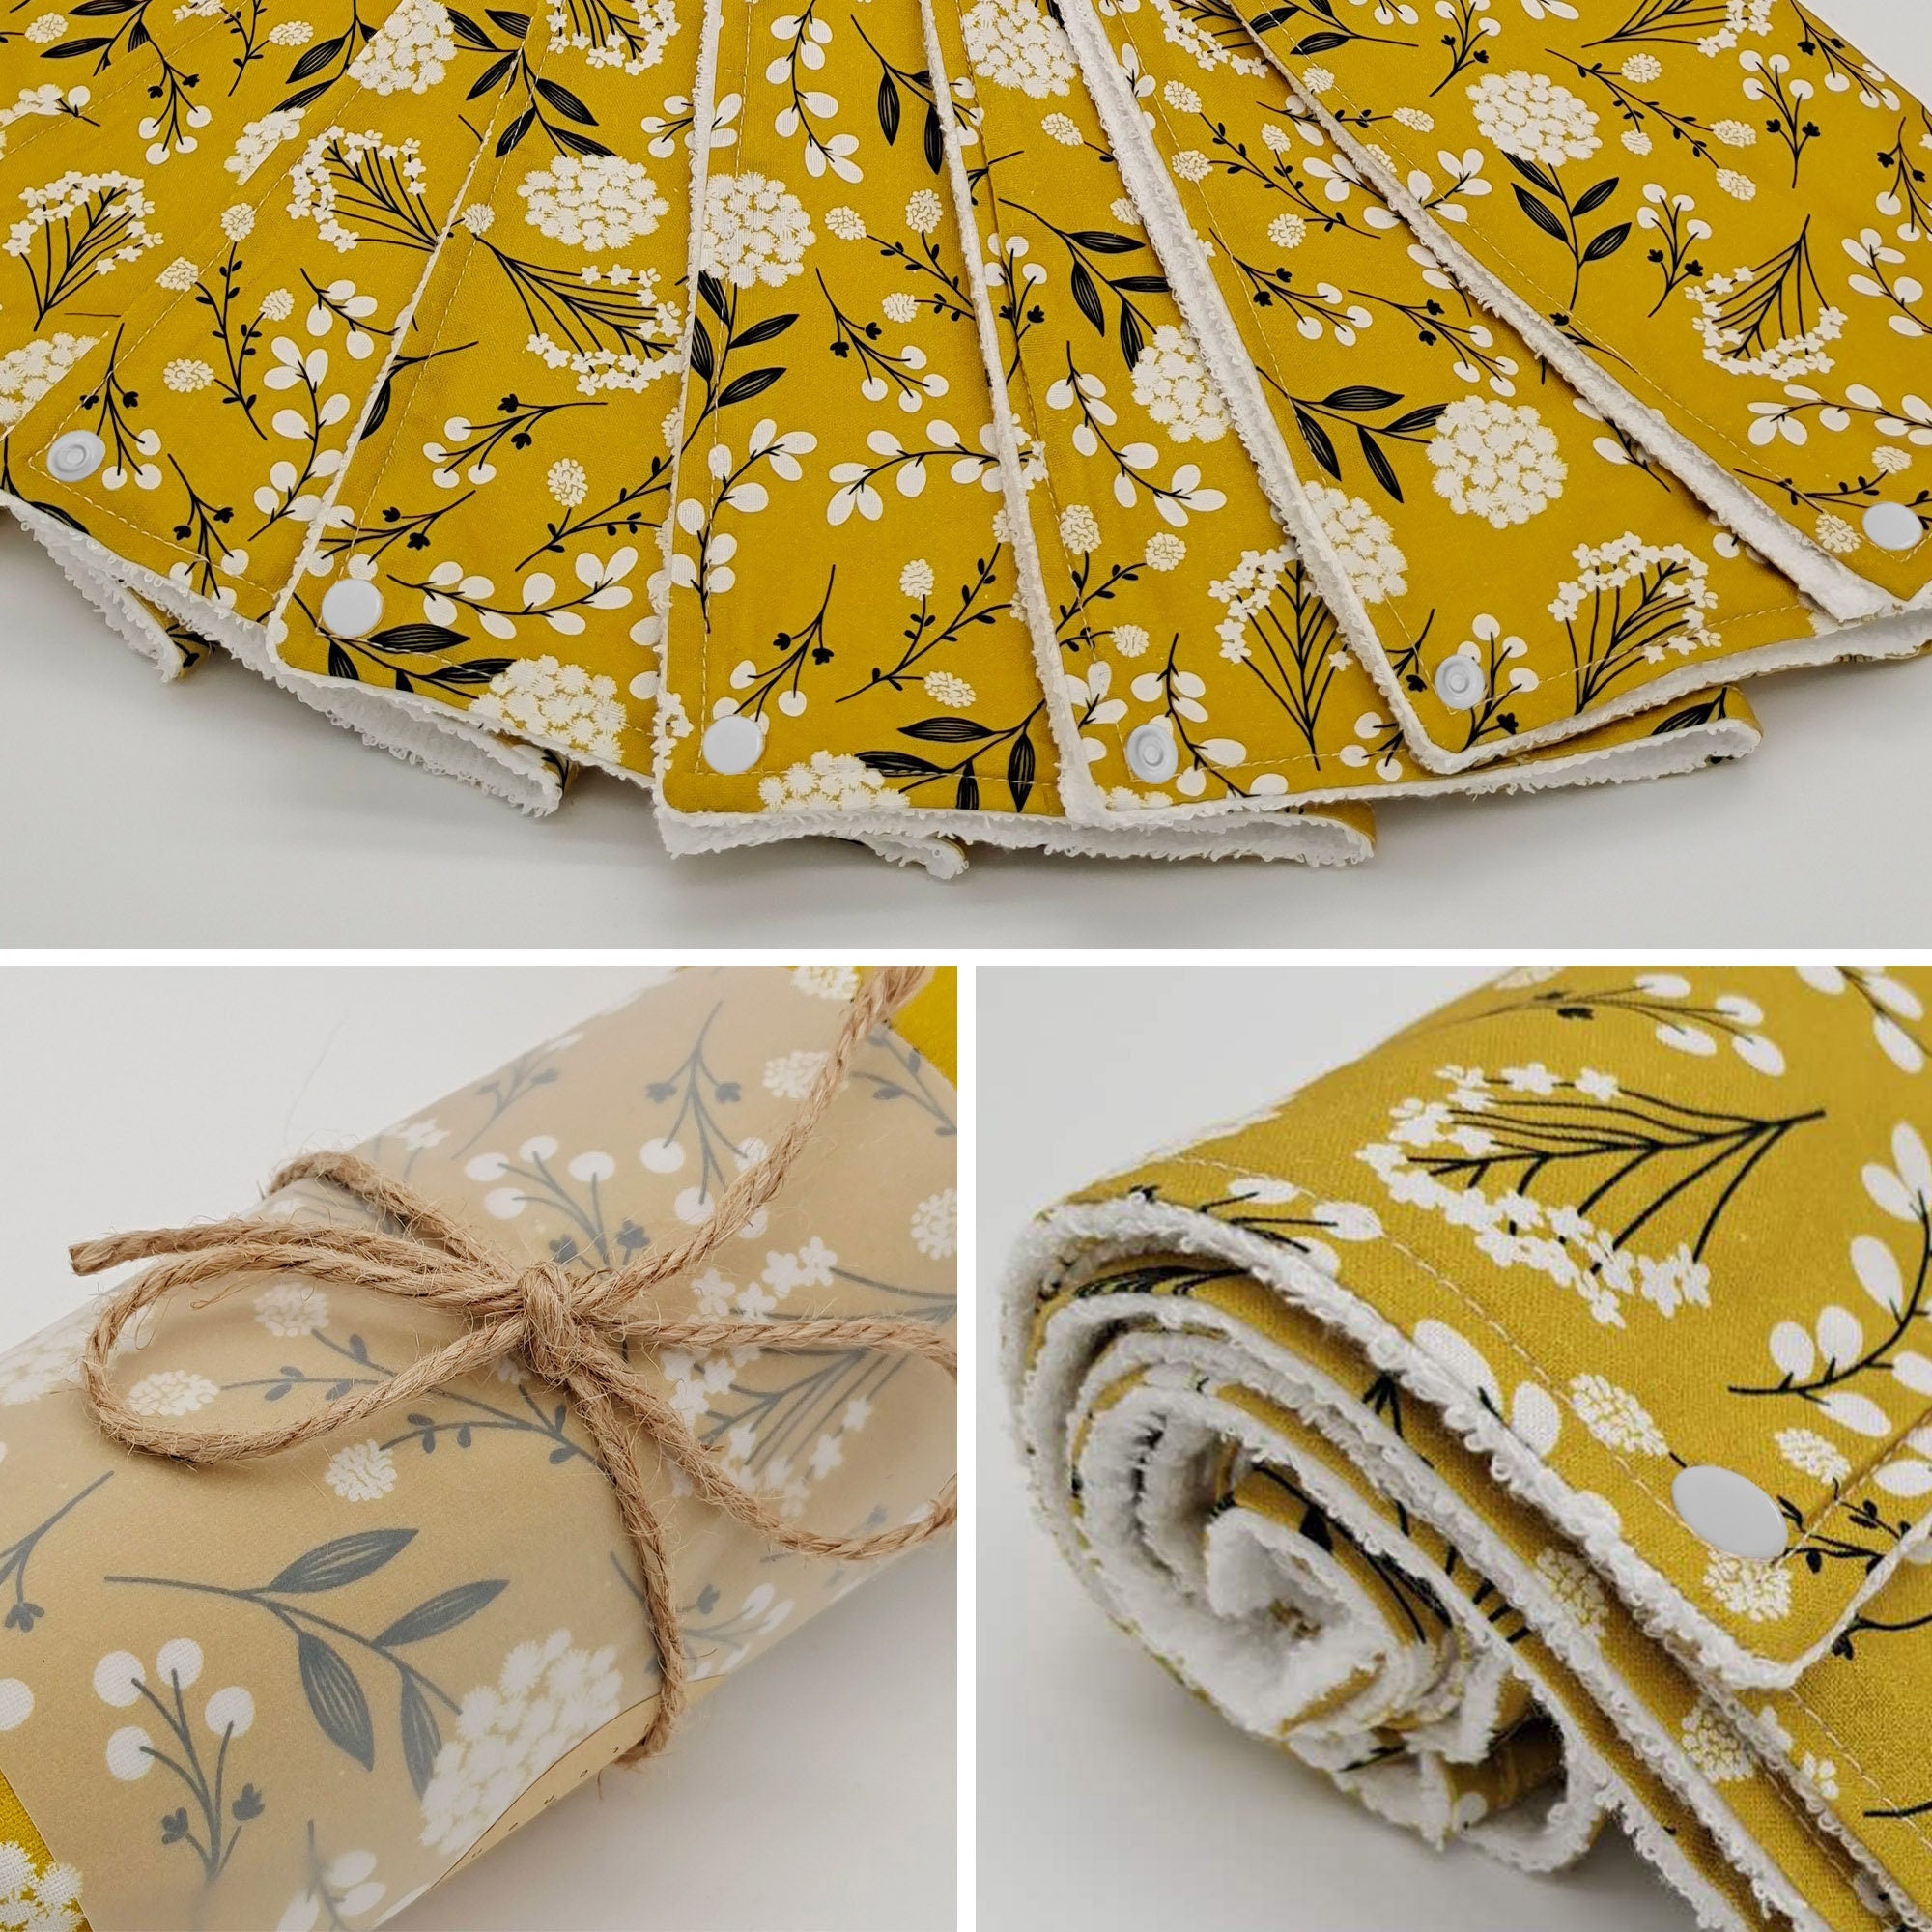 Paperless Towels roll, Zero Waste, Paperless Towels, Kitchen Clothes, Dish Towels ,Pre-Rolled Reusable paper towels, Yellow dandelion